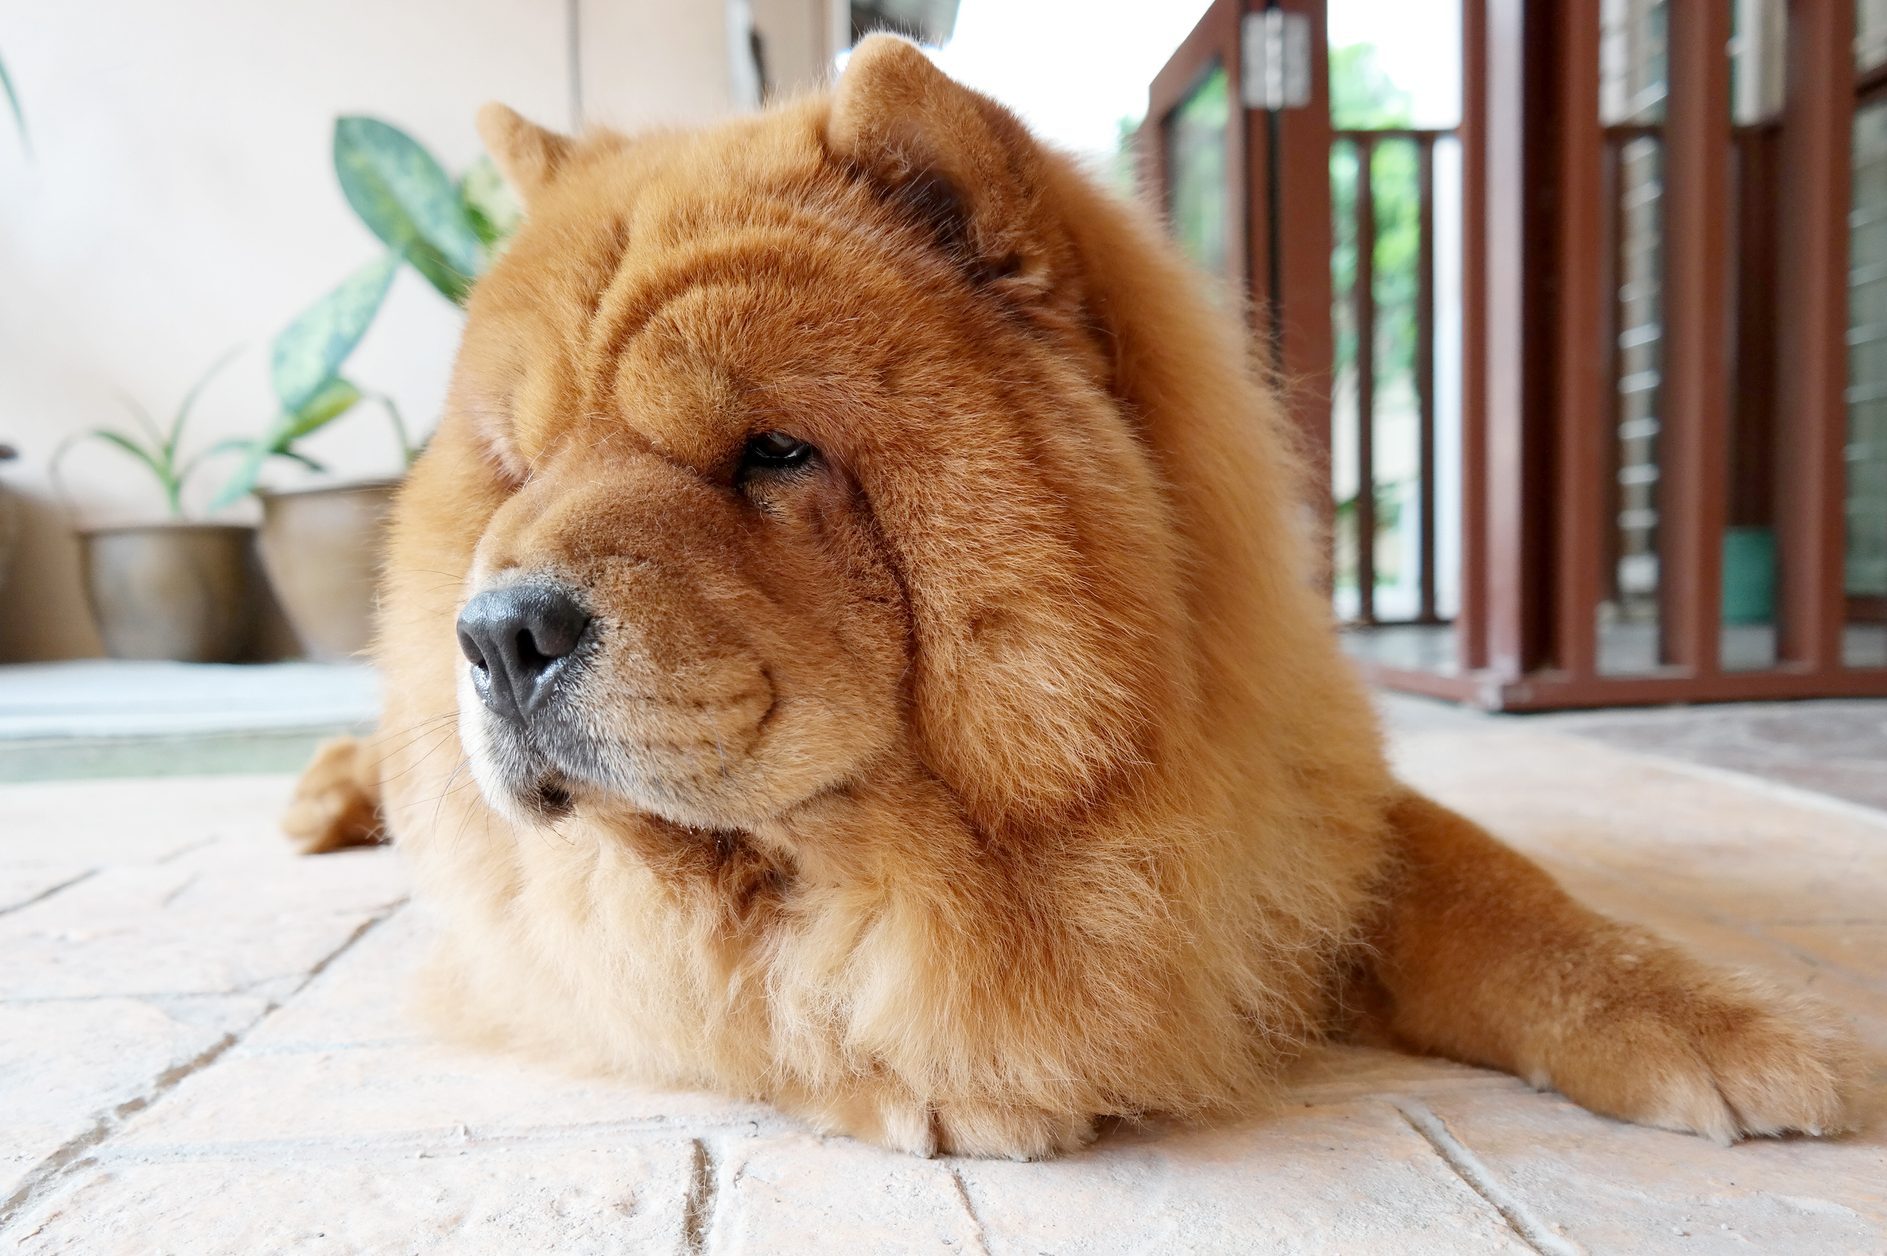 25 Fluffy Dog Breeds with CloudLike Coats with Pictures